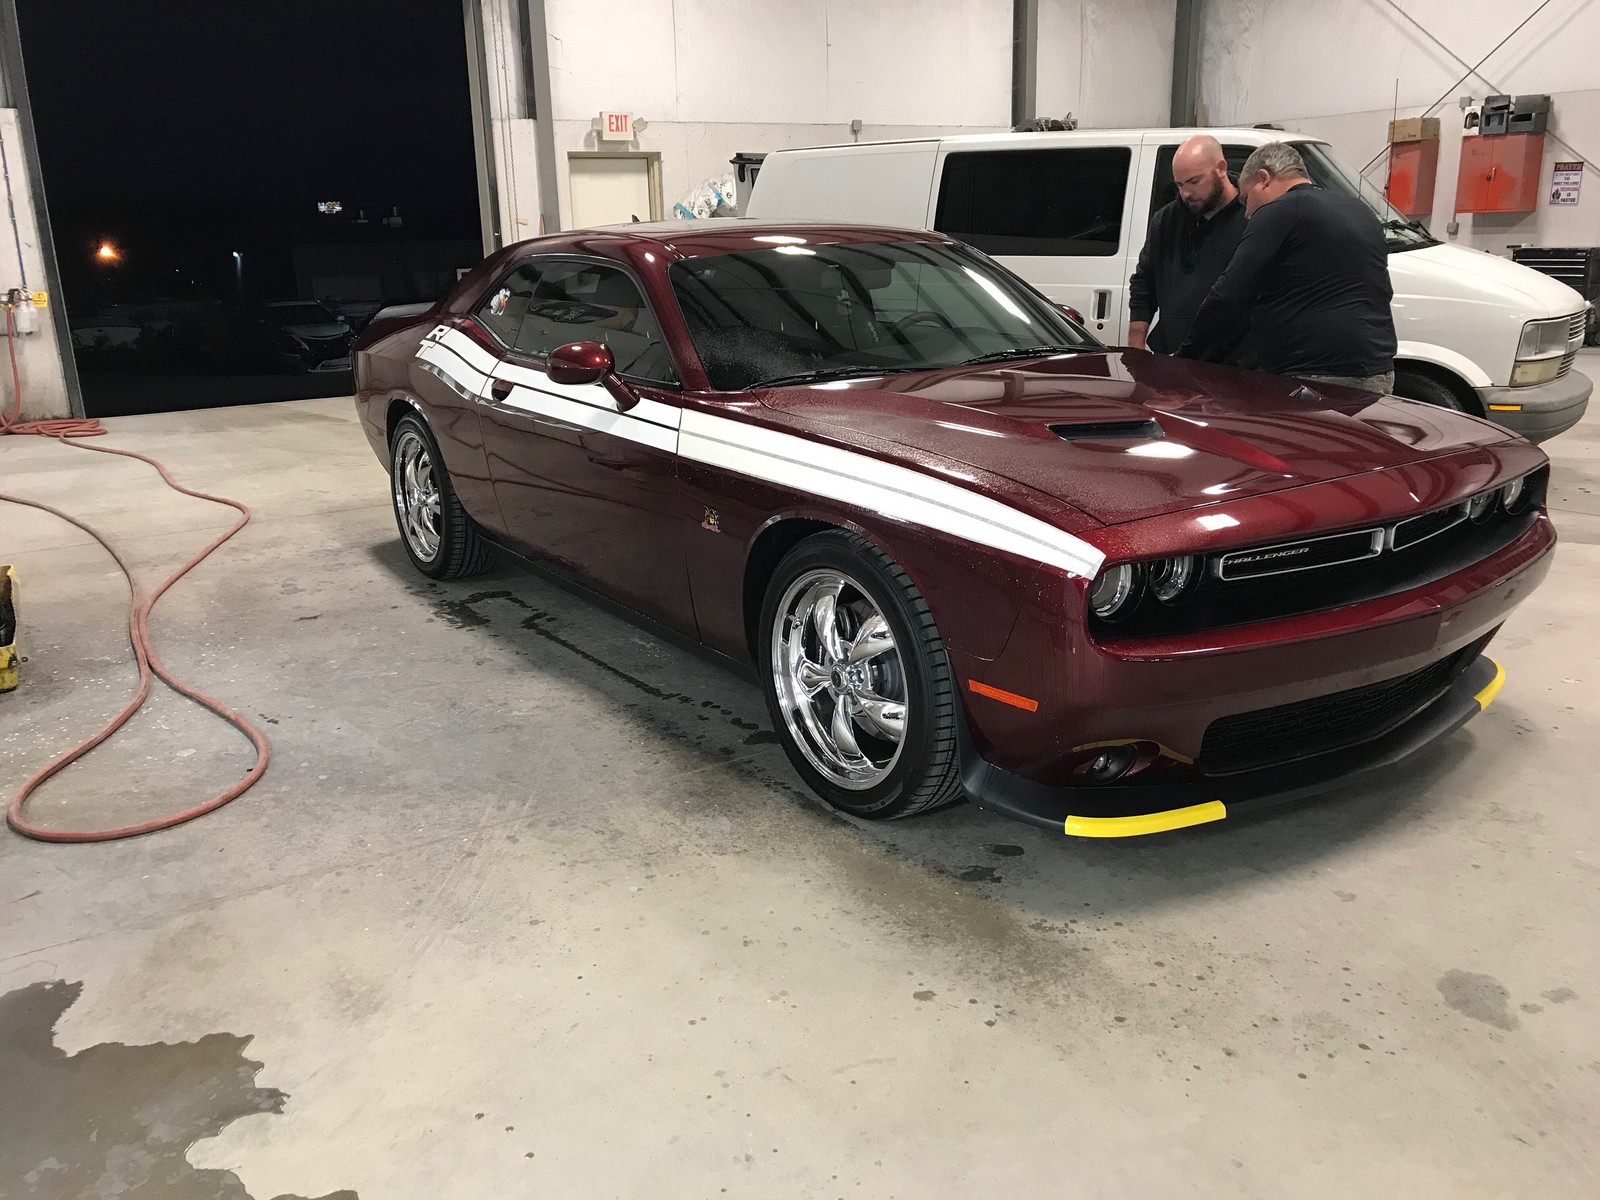 2018 OCTANE RED PEARL Dodge Challenger SRT8 RT SCAT PACK 392 STOCK picture, mods, upgrades